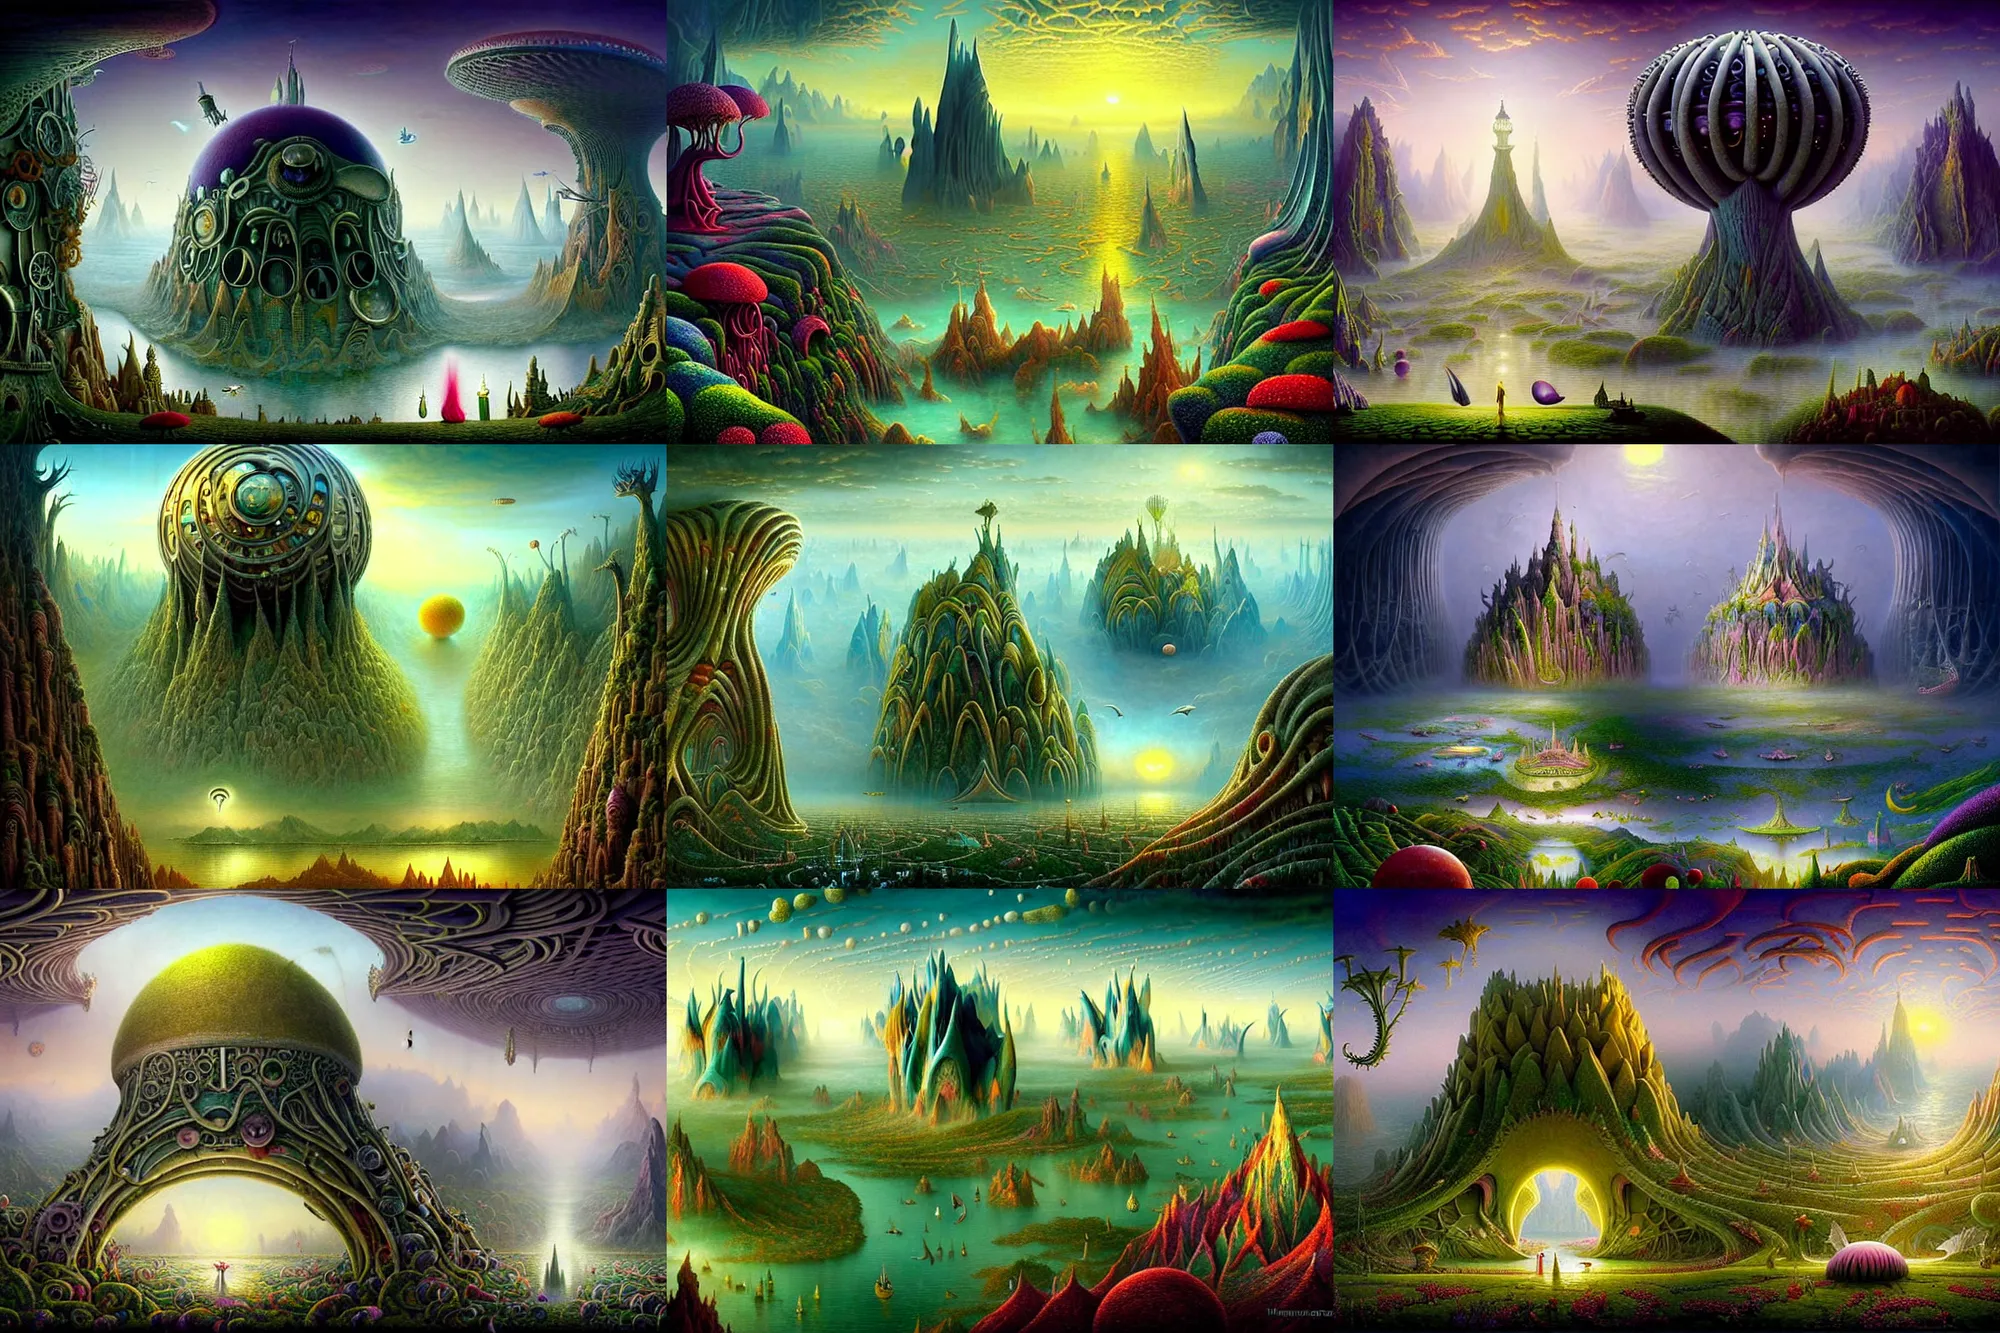 Prompt: a beautiful epic stunning amazing and insanely detailed matte painting of alien dream worlds with surreal architecture designed by Heironymous Bosch, mega structures inspired by Heironymous Bosch's Garden of Earthly Delights, vast surreal landscape and horizon by Andrew Ferez and Thomas Kinkade and Cyril Rolando, masterpiece!!, grand!, imaginative!!!, whimsical!!, epic scale, intricate details, sense of awe, elite, wonder, insanely complex, masterful composition, sharp focus, fantasy realism, dramatic lighting, hyperrealistic